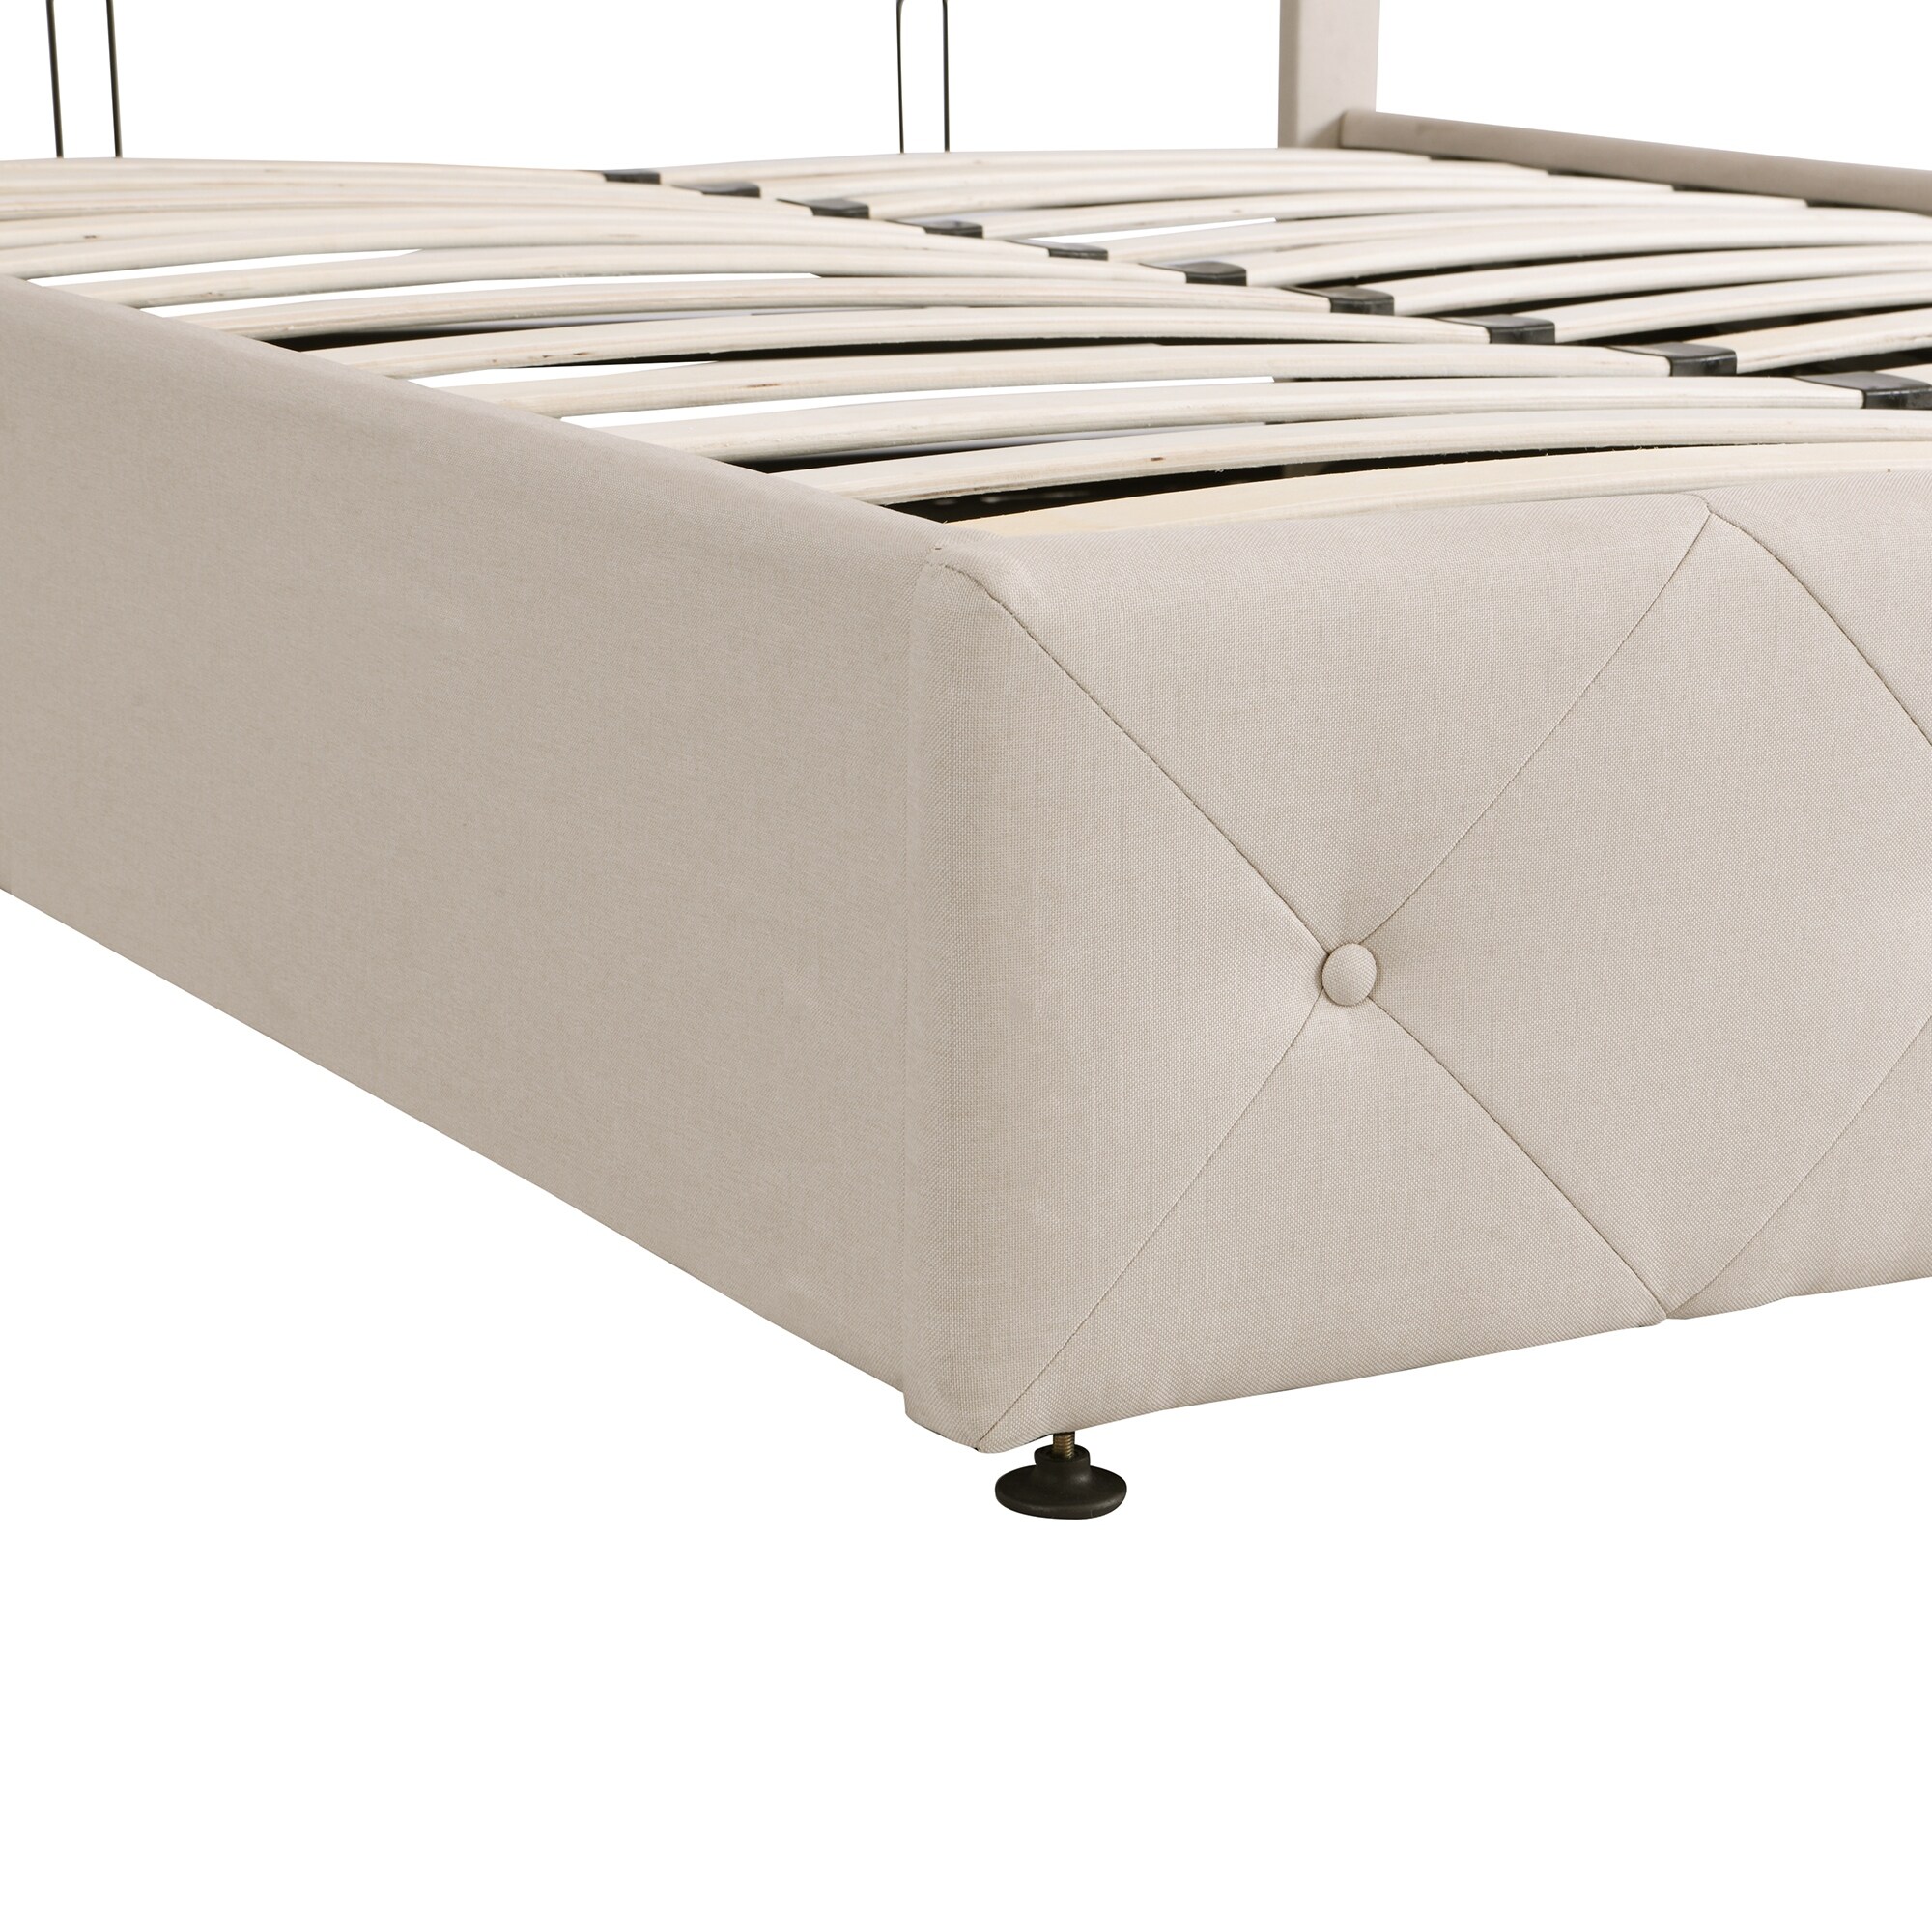 Full Size Hydraulic Storage System Platform Bed with Tufted Upholstery, 77.9''L*58.8''W*48.6''H, 82LBS